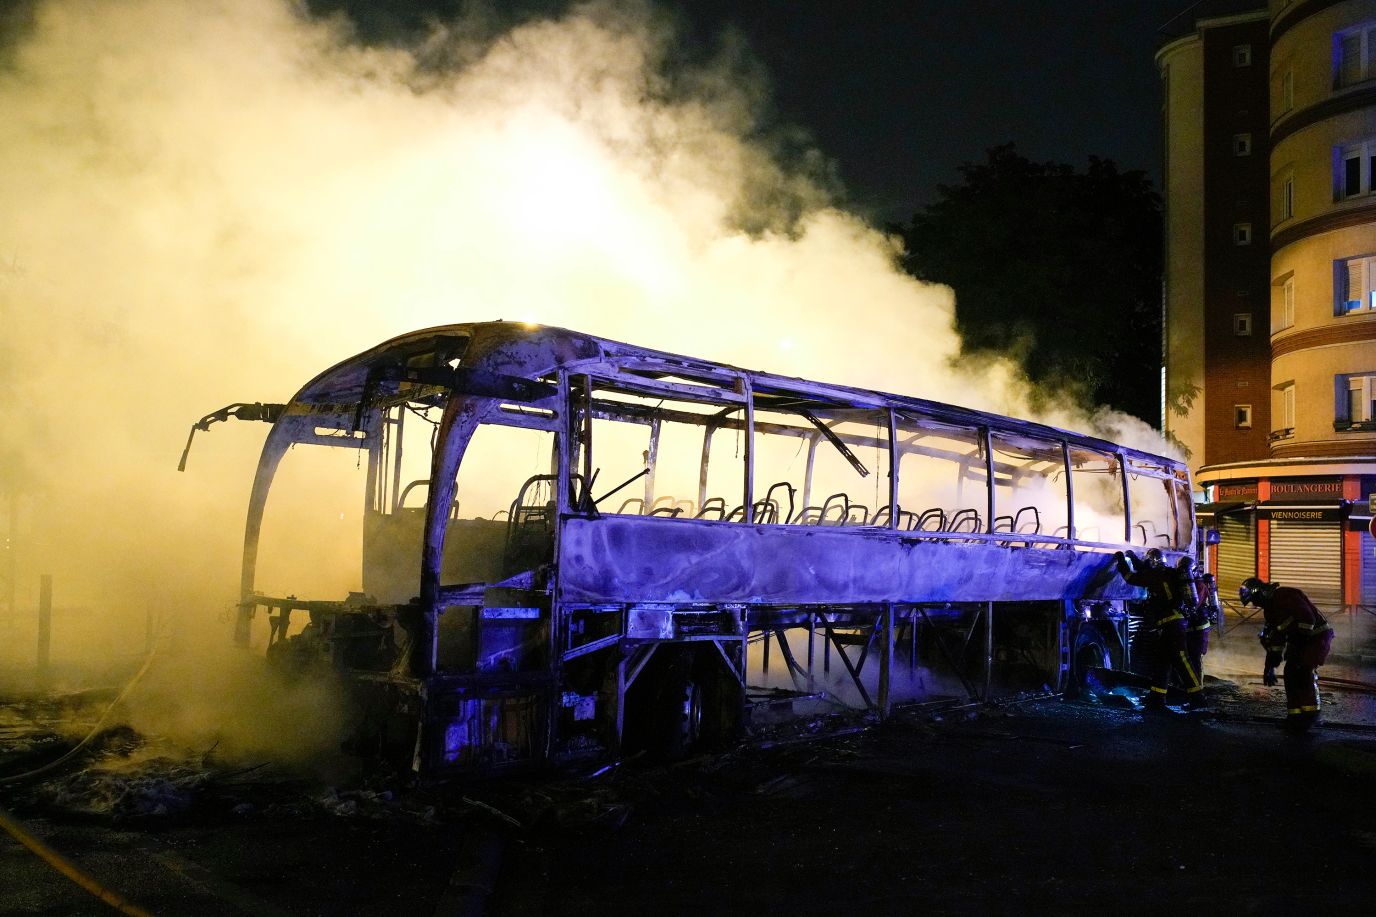 Firefighters use a water hose on a burnt bus in Nanterre, France, on July 1.